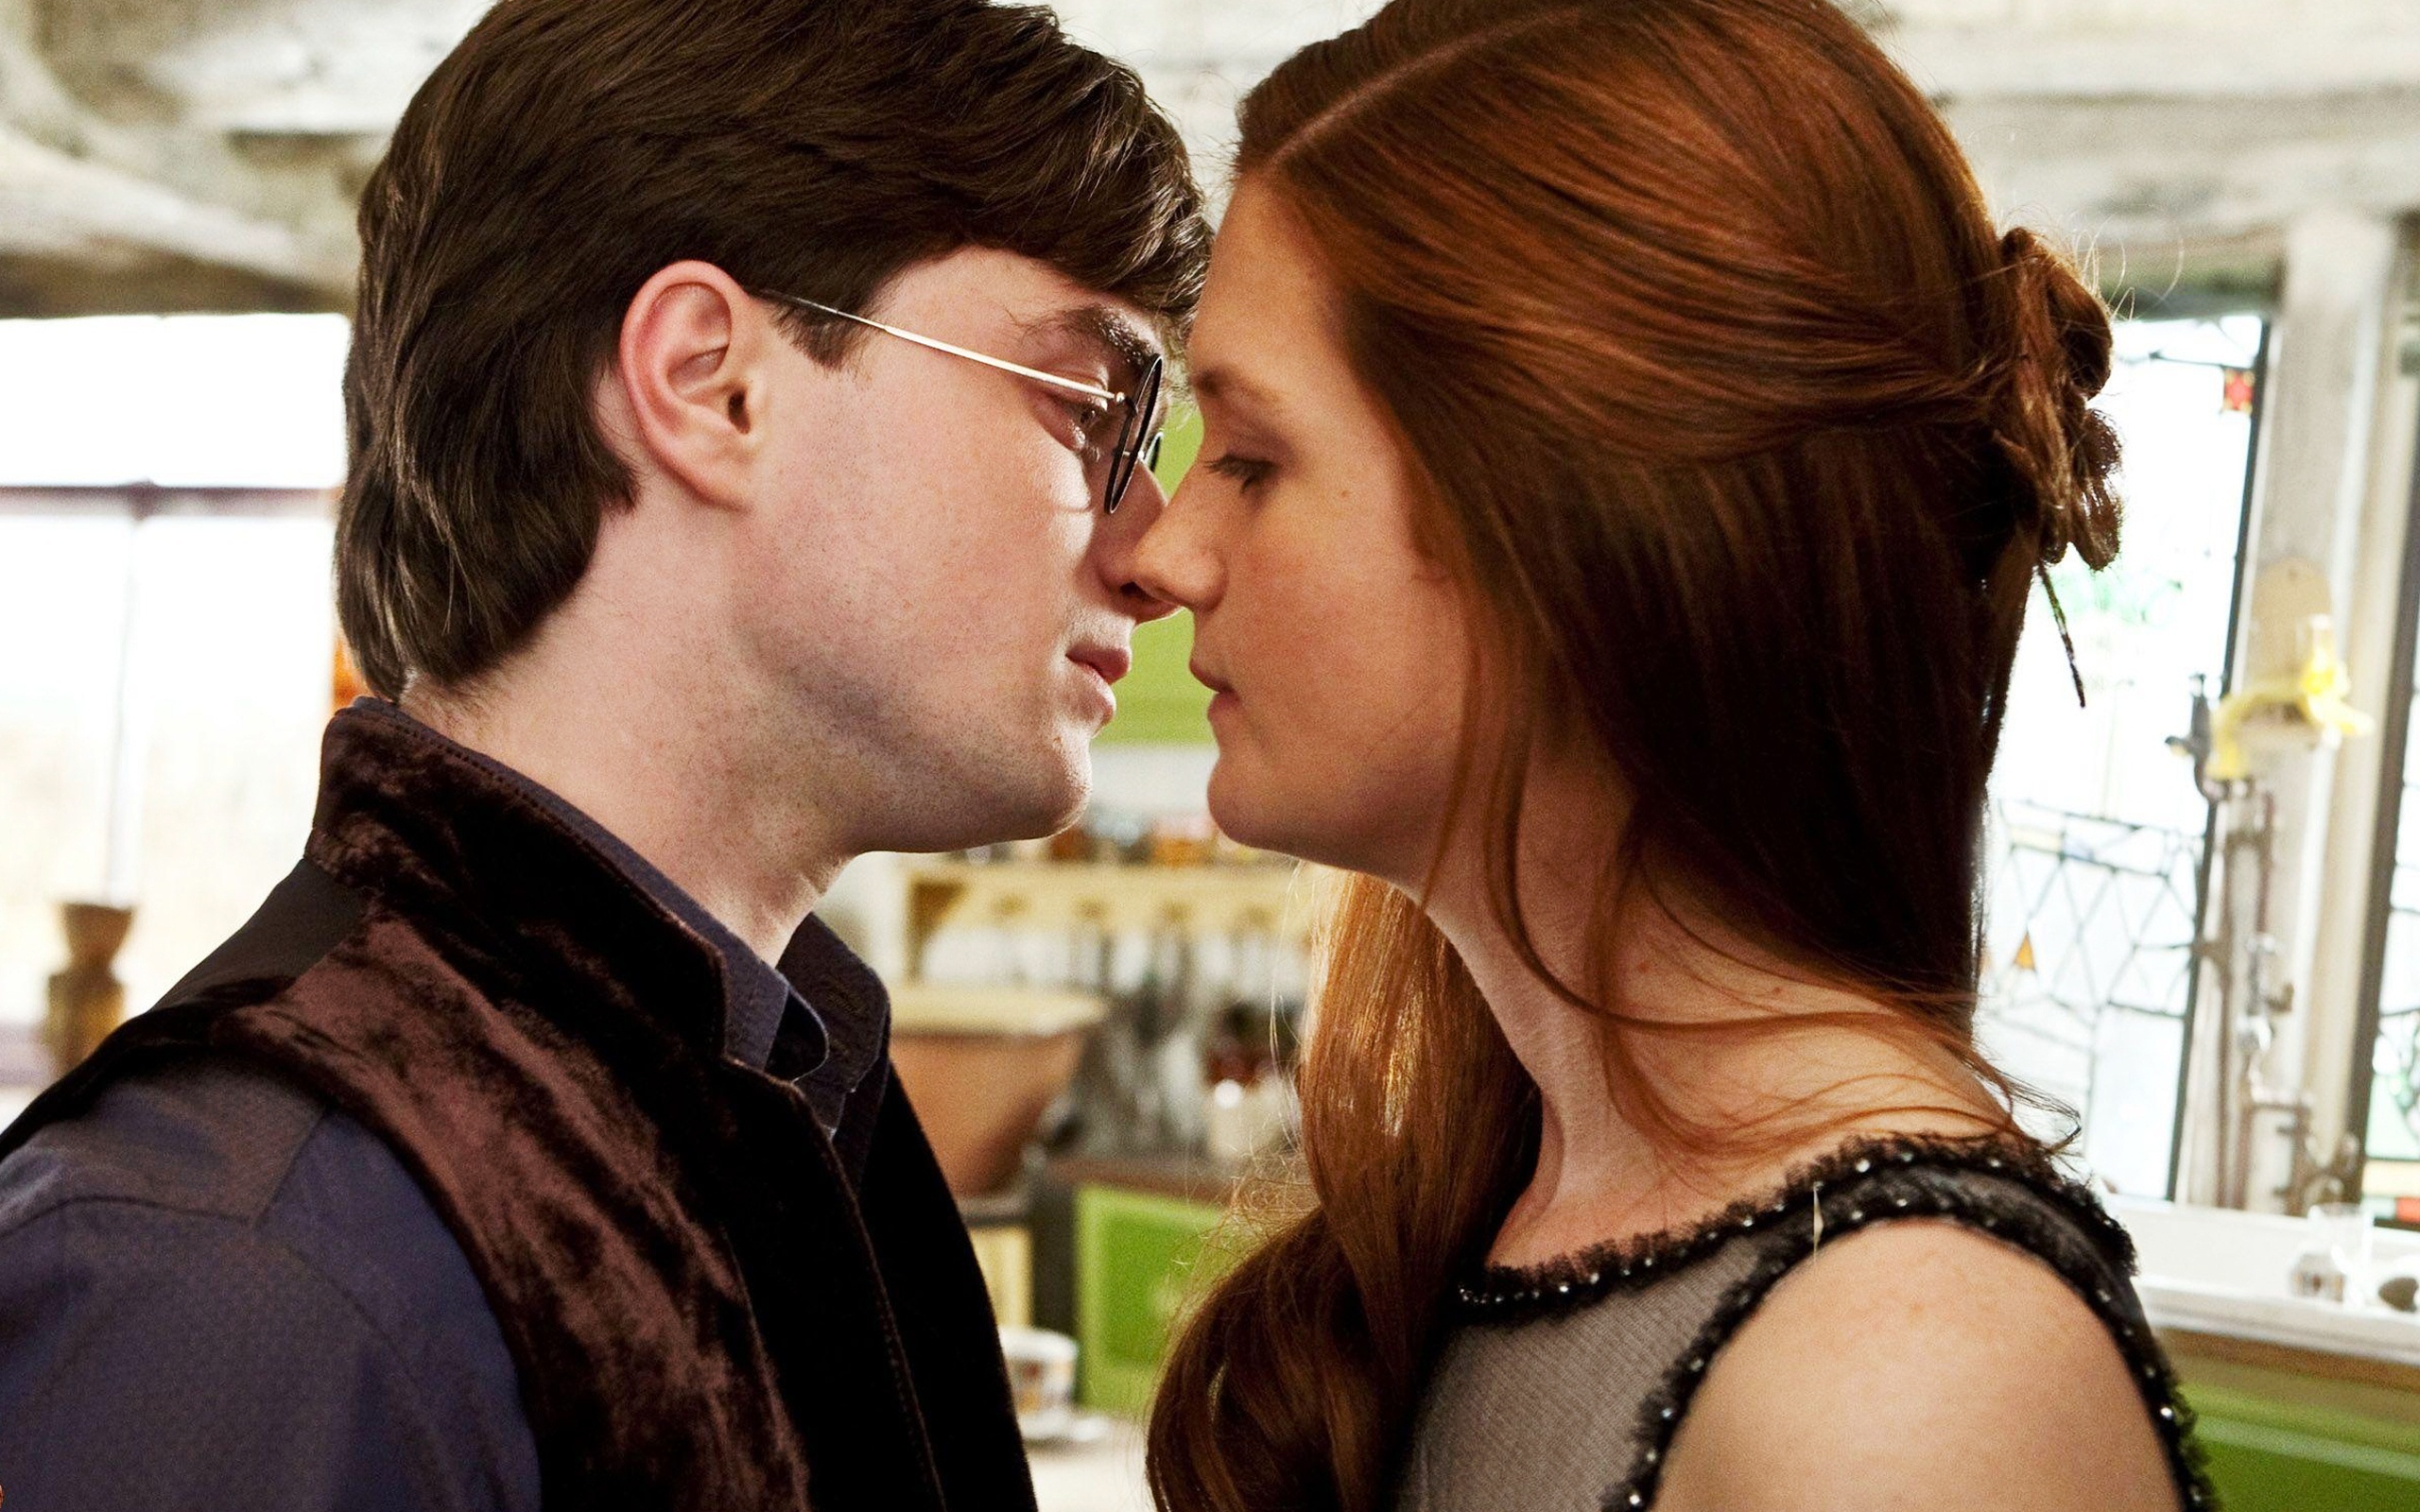 Harry Potter Ginny Kiss Deathly Hallows 2 Wallpaper in jpg format